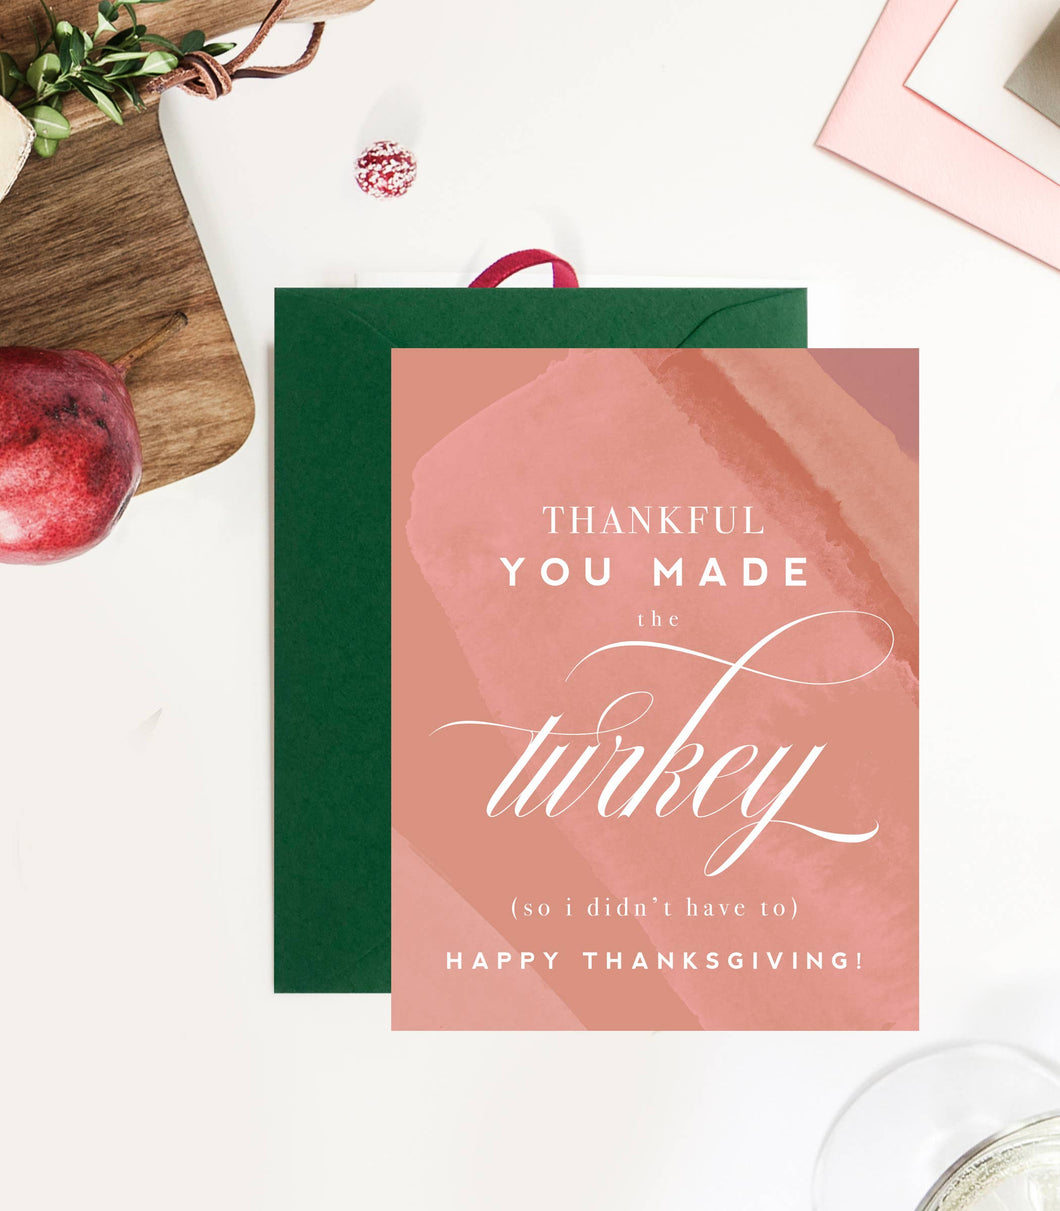 Kitty Meow Boutique - Thankful You Made the Turkey  - Thanksgiving Card